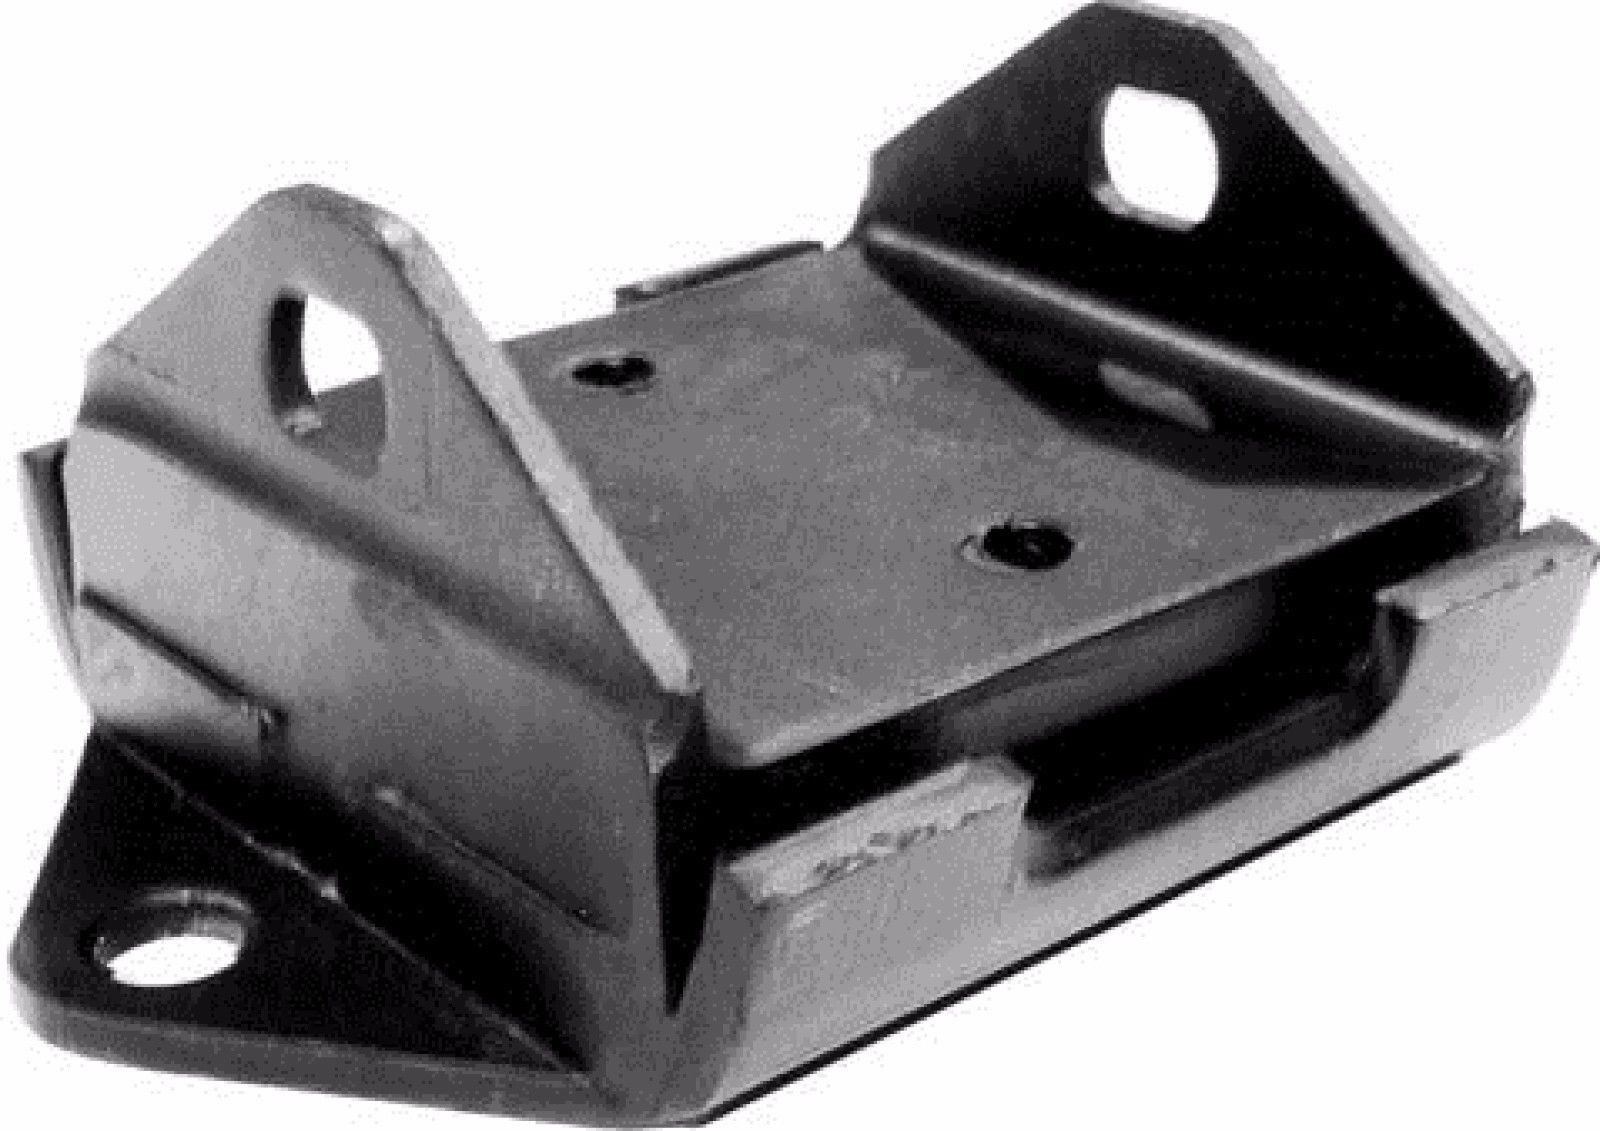 1967-1971 Ford Mustang pair of Motor Mounts fits 390,427,428 and 429 Cj